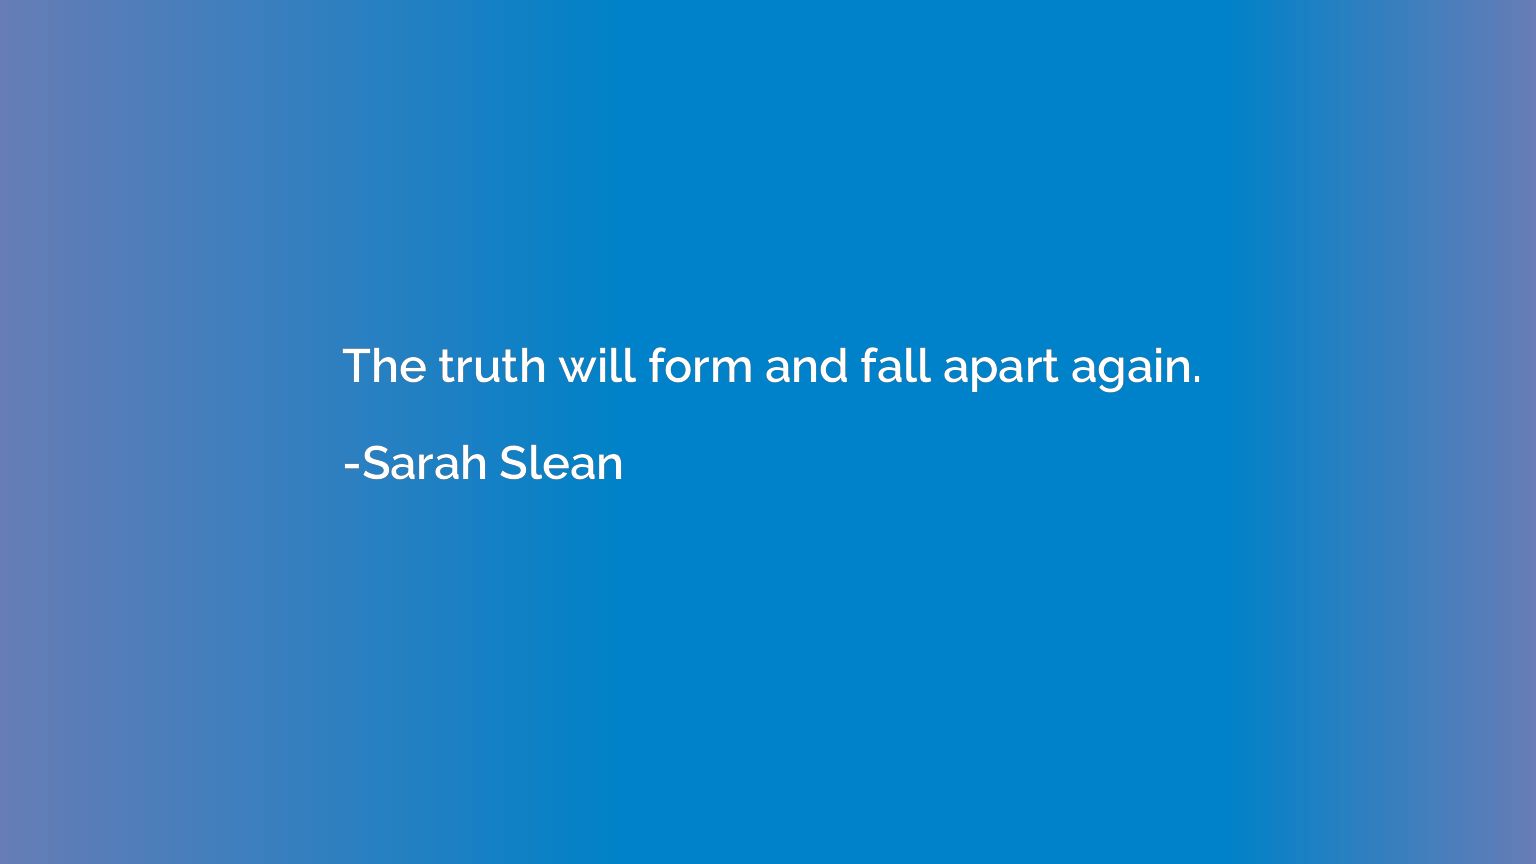 The truth will form and fall apart again.